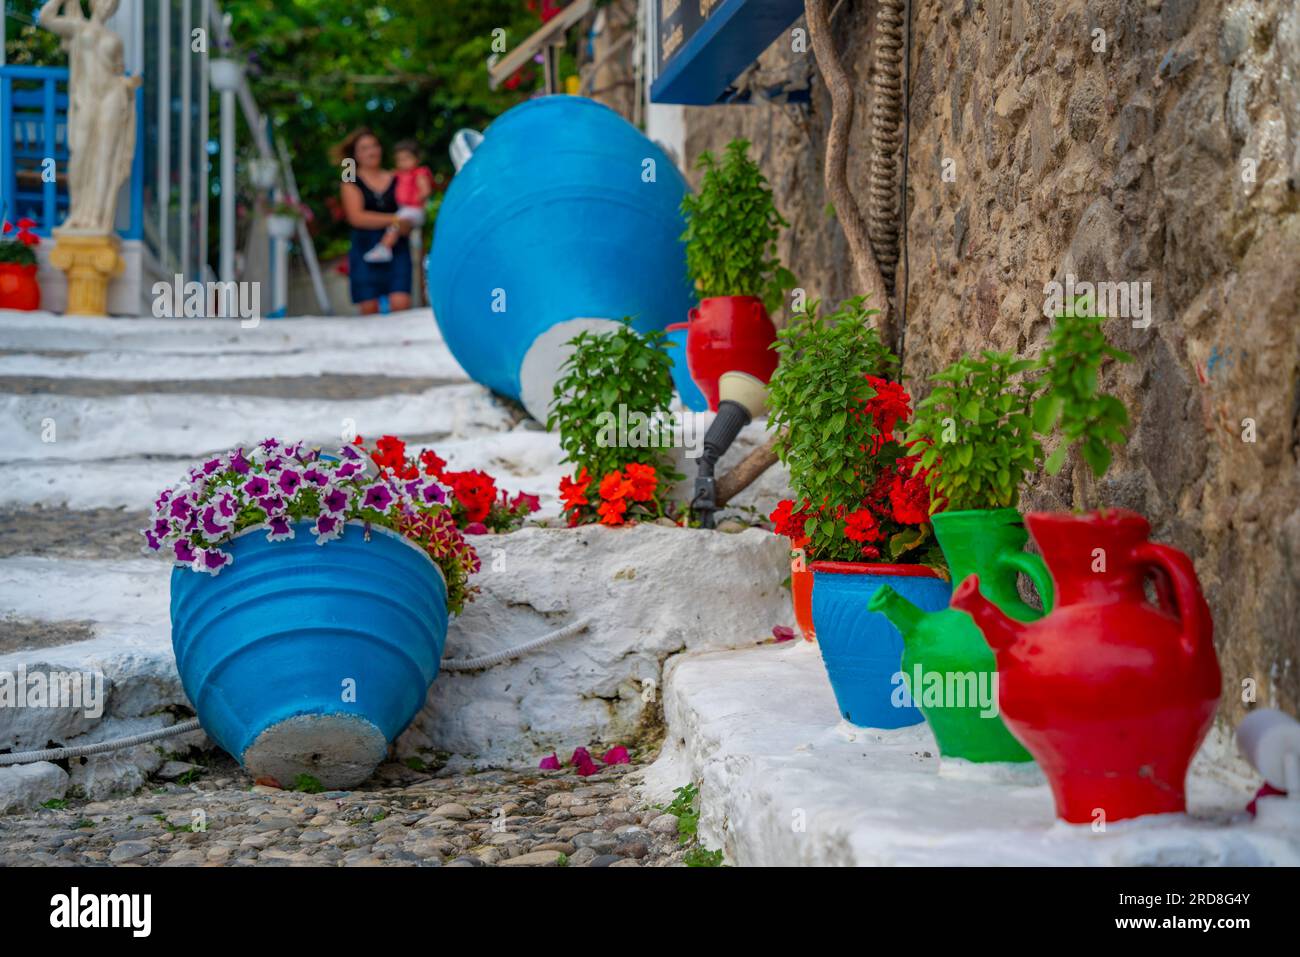 View of traditional colourful plant pots in Kos Town, Kos, Dodecanese, Greek Islands, Greece, Europe Stock Photo